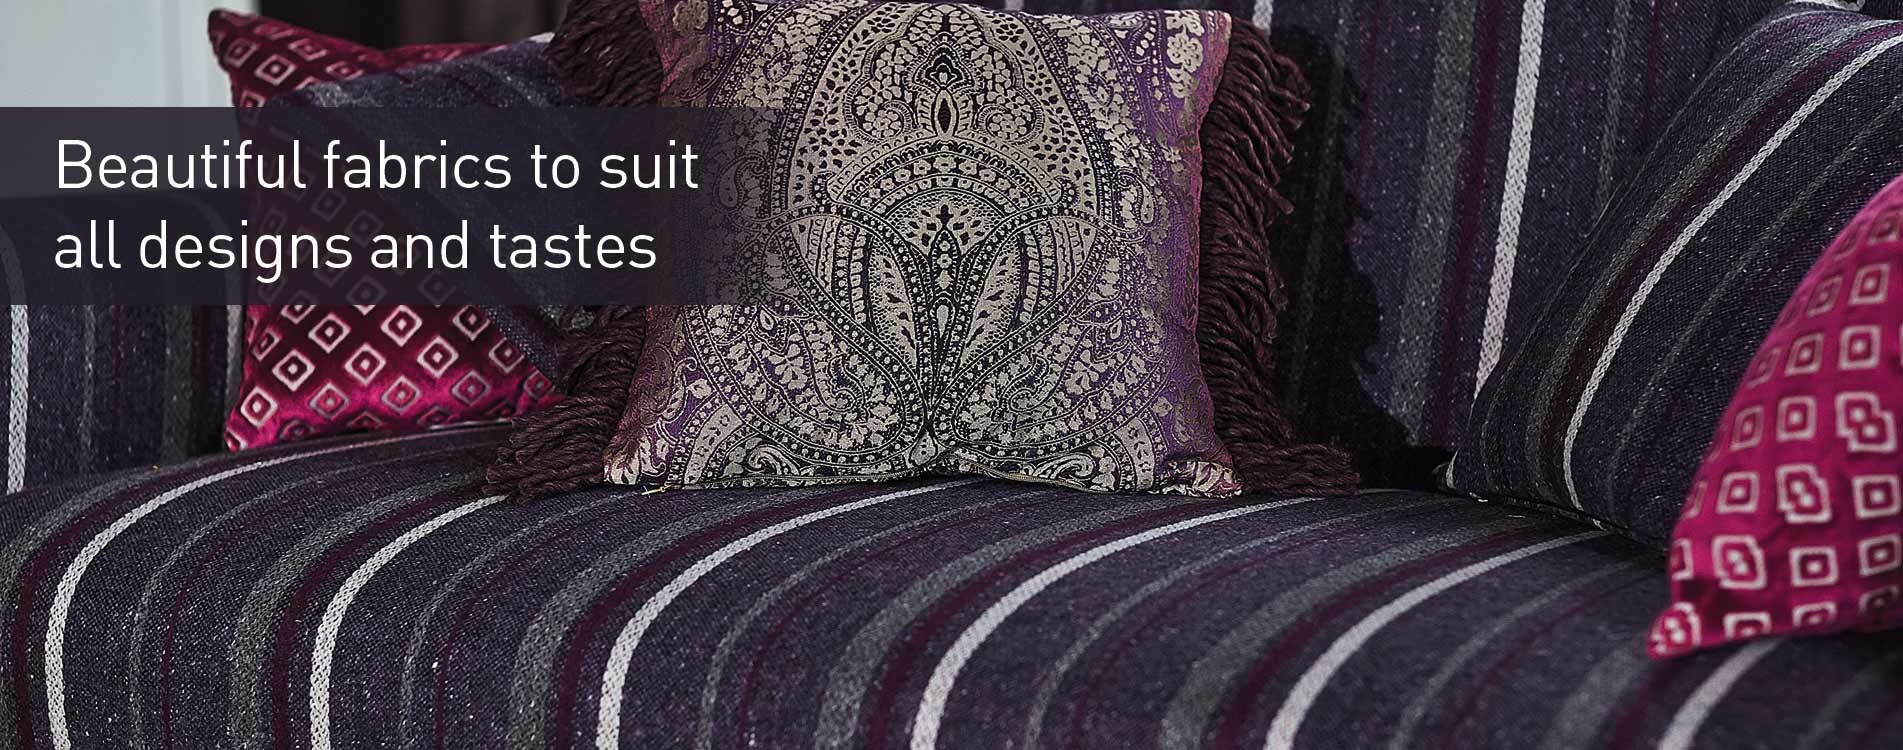 Comprehensive choice of material fabrics to suit all tastes